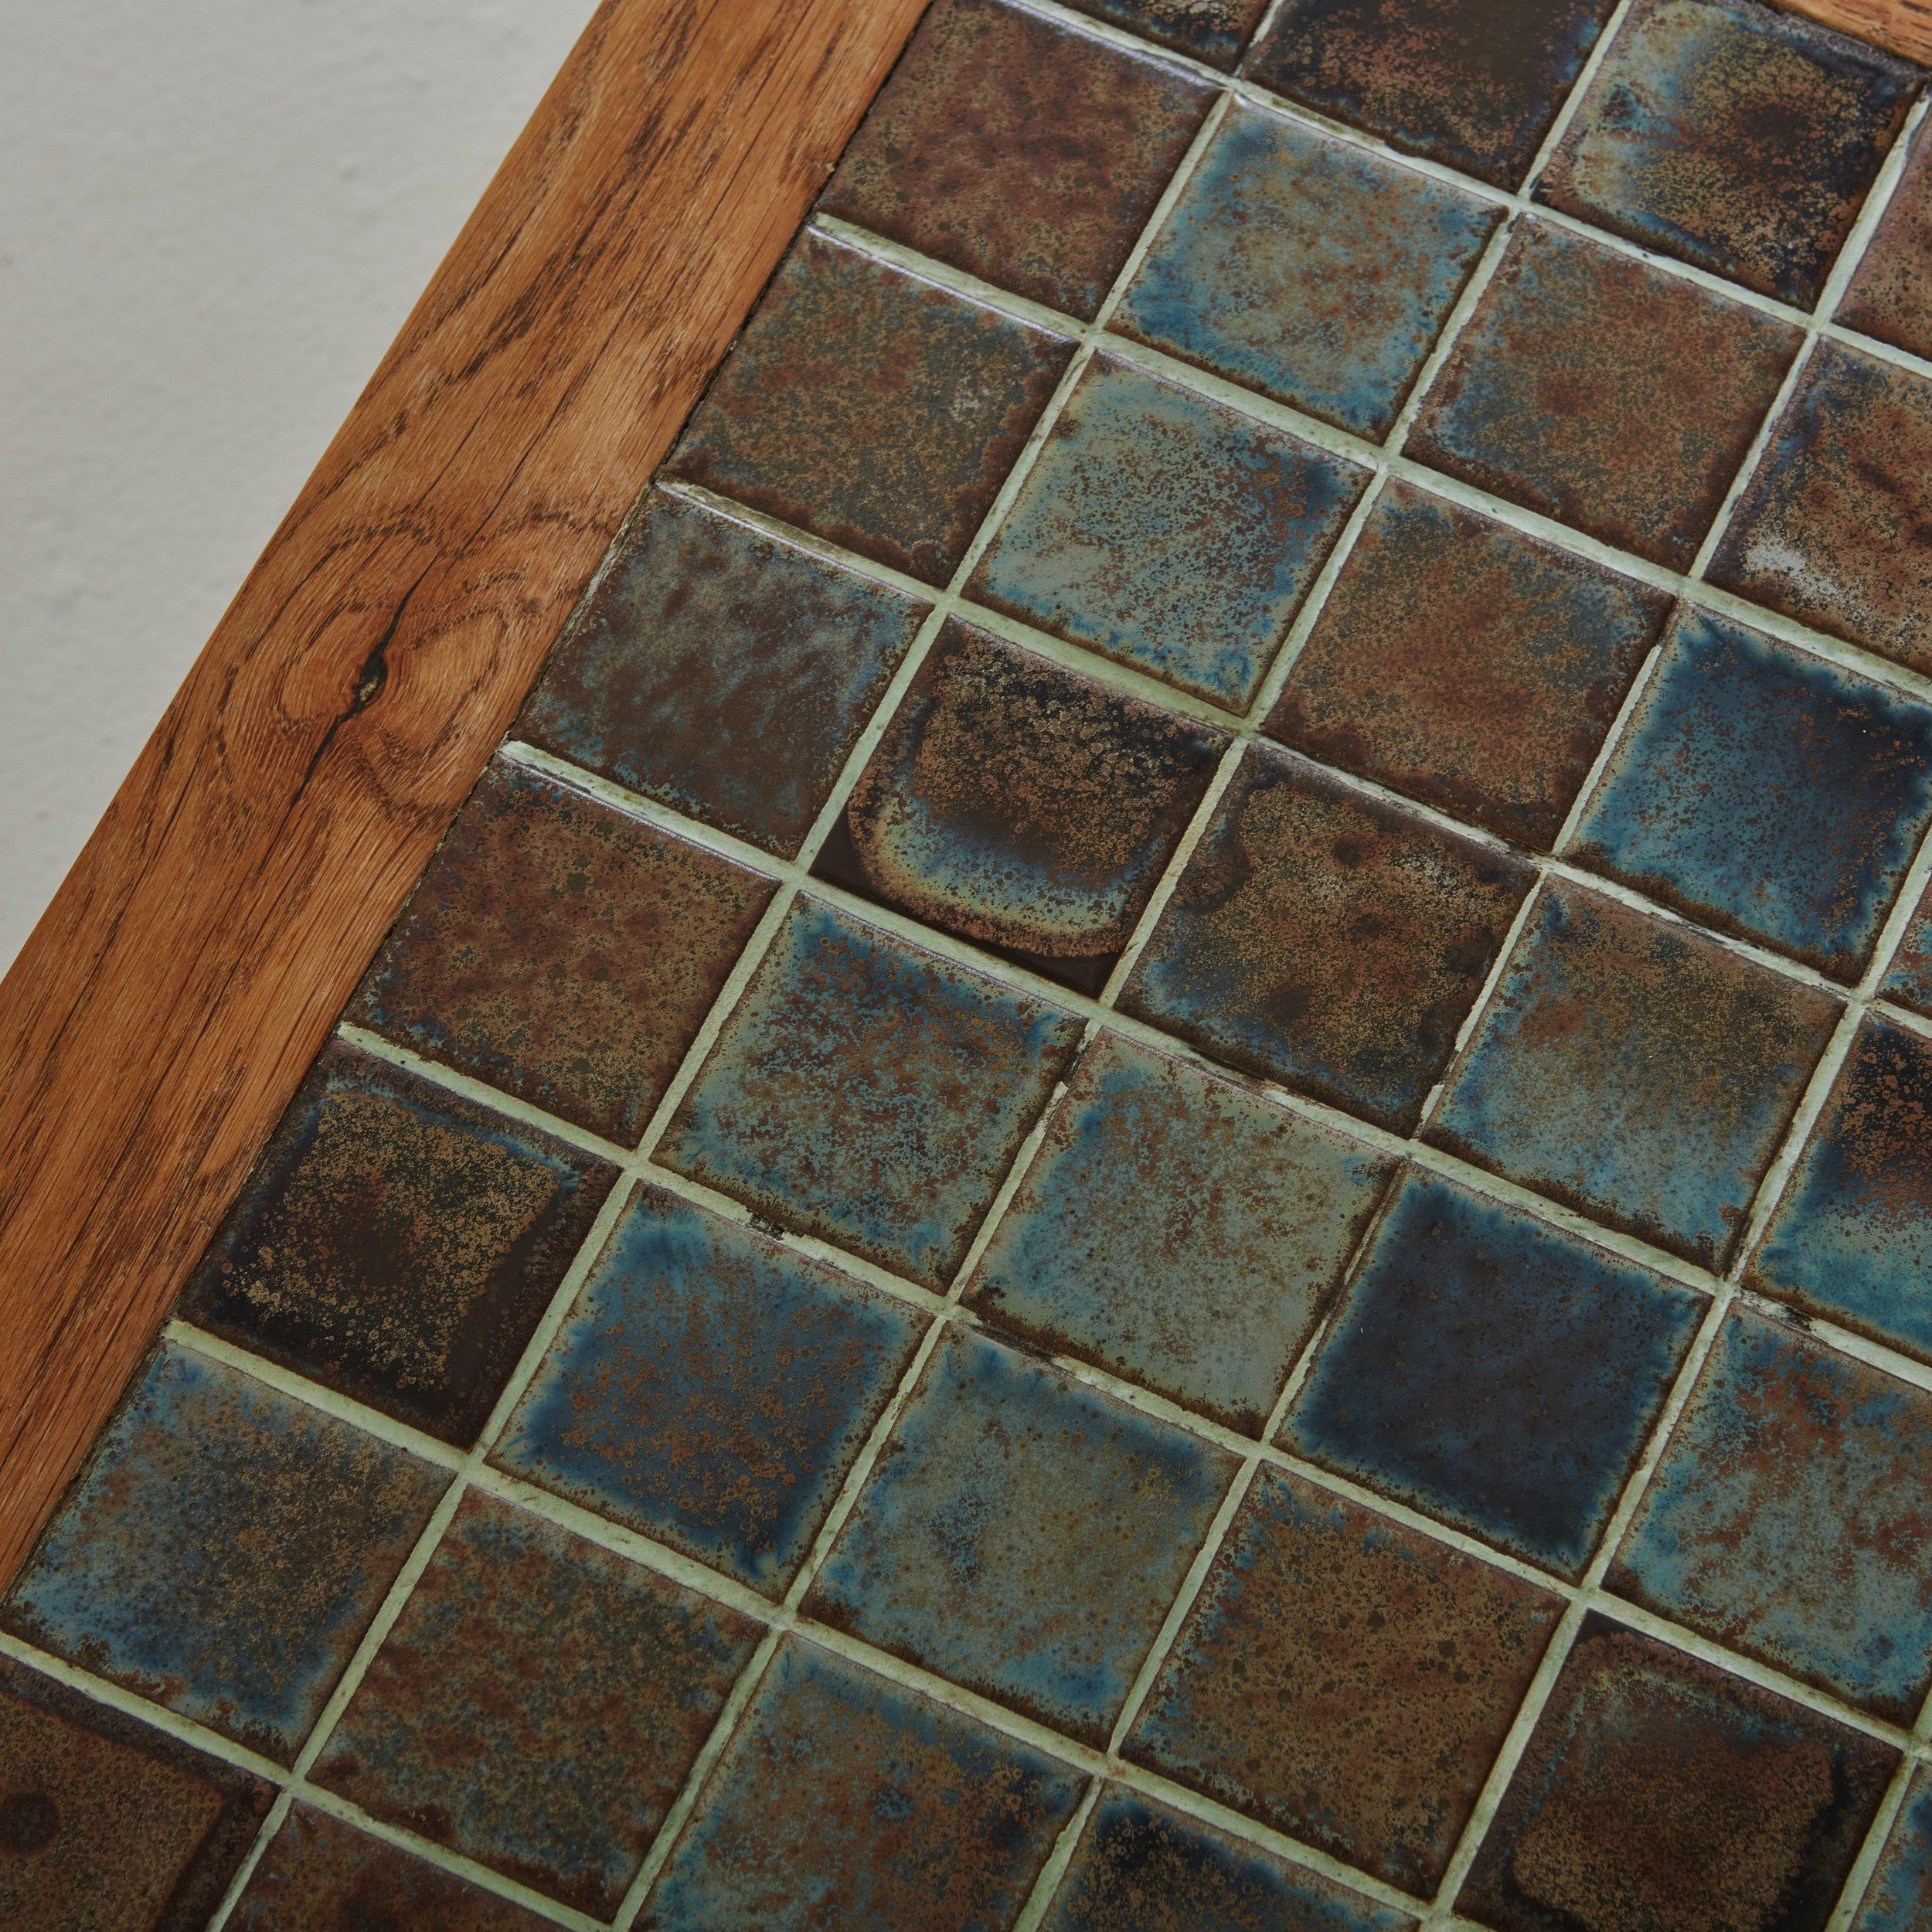 Mid-20th Century Rectangular Pine Wood Coffee Table with Blue + Brown Ceramic Tile Top For Sale